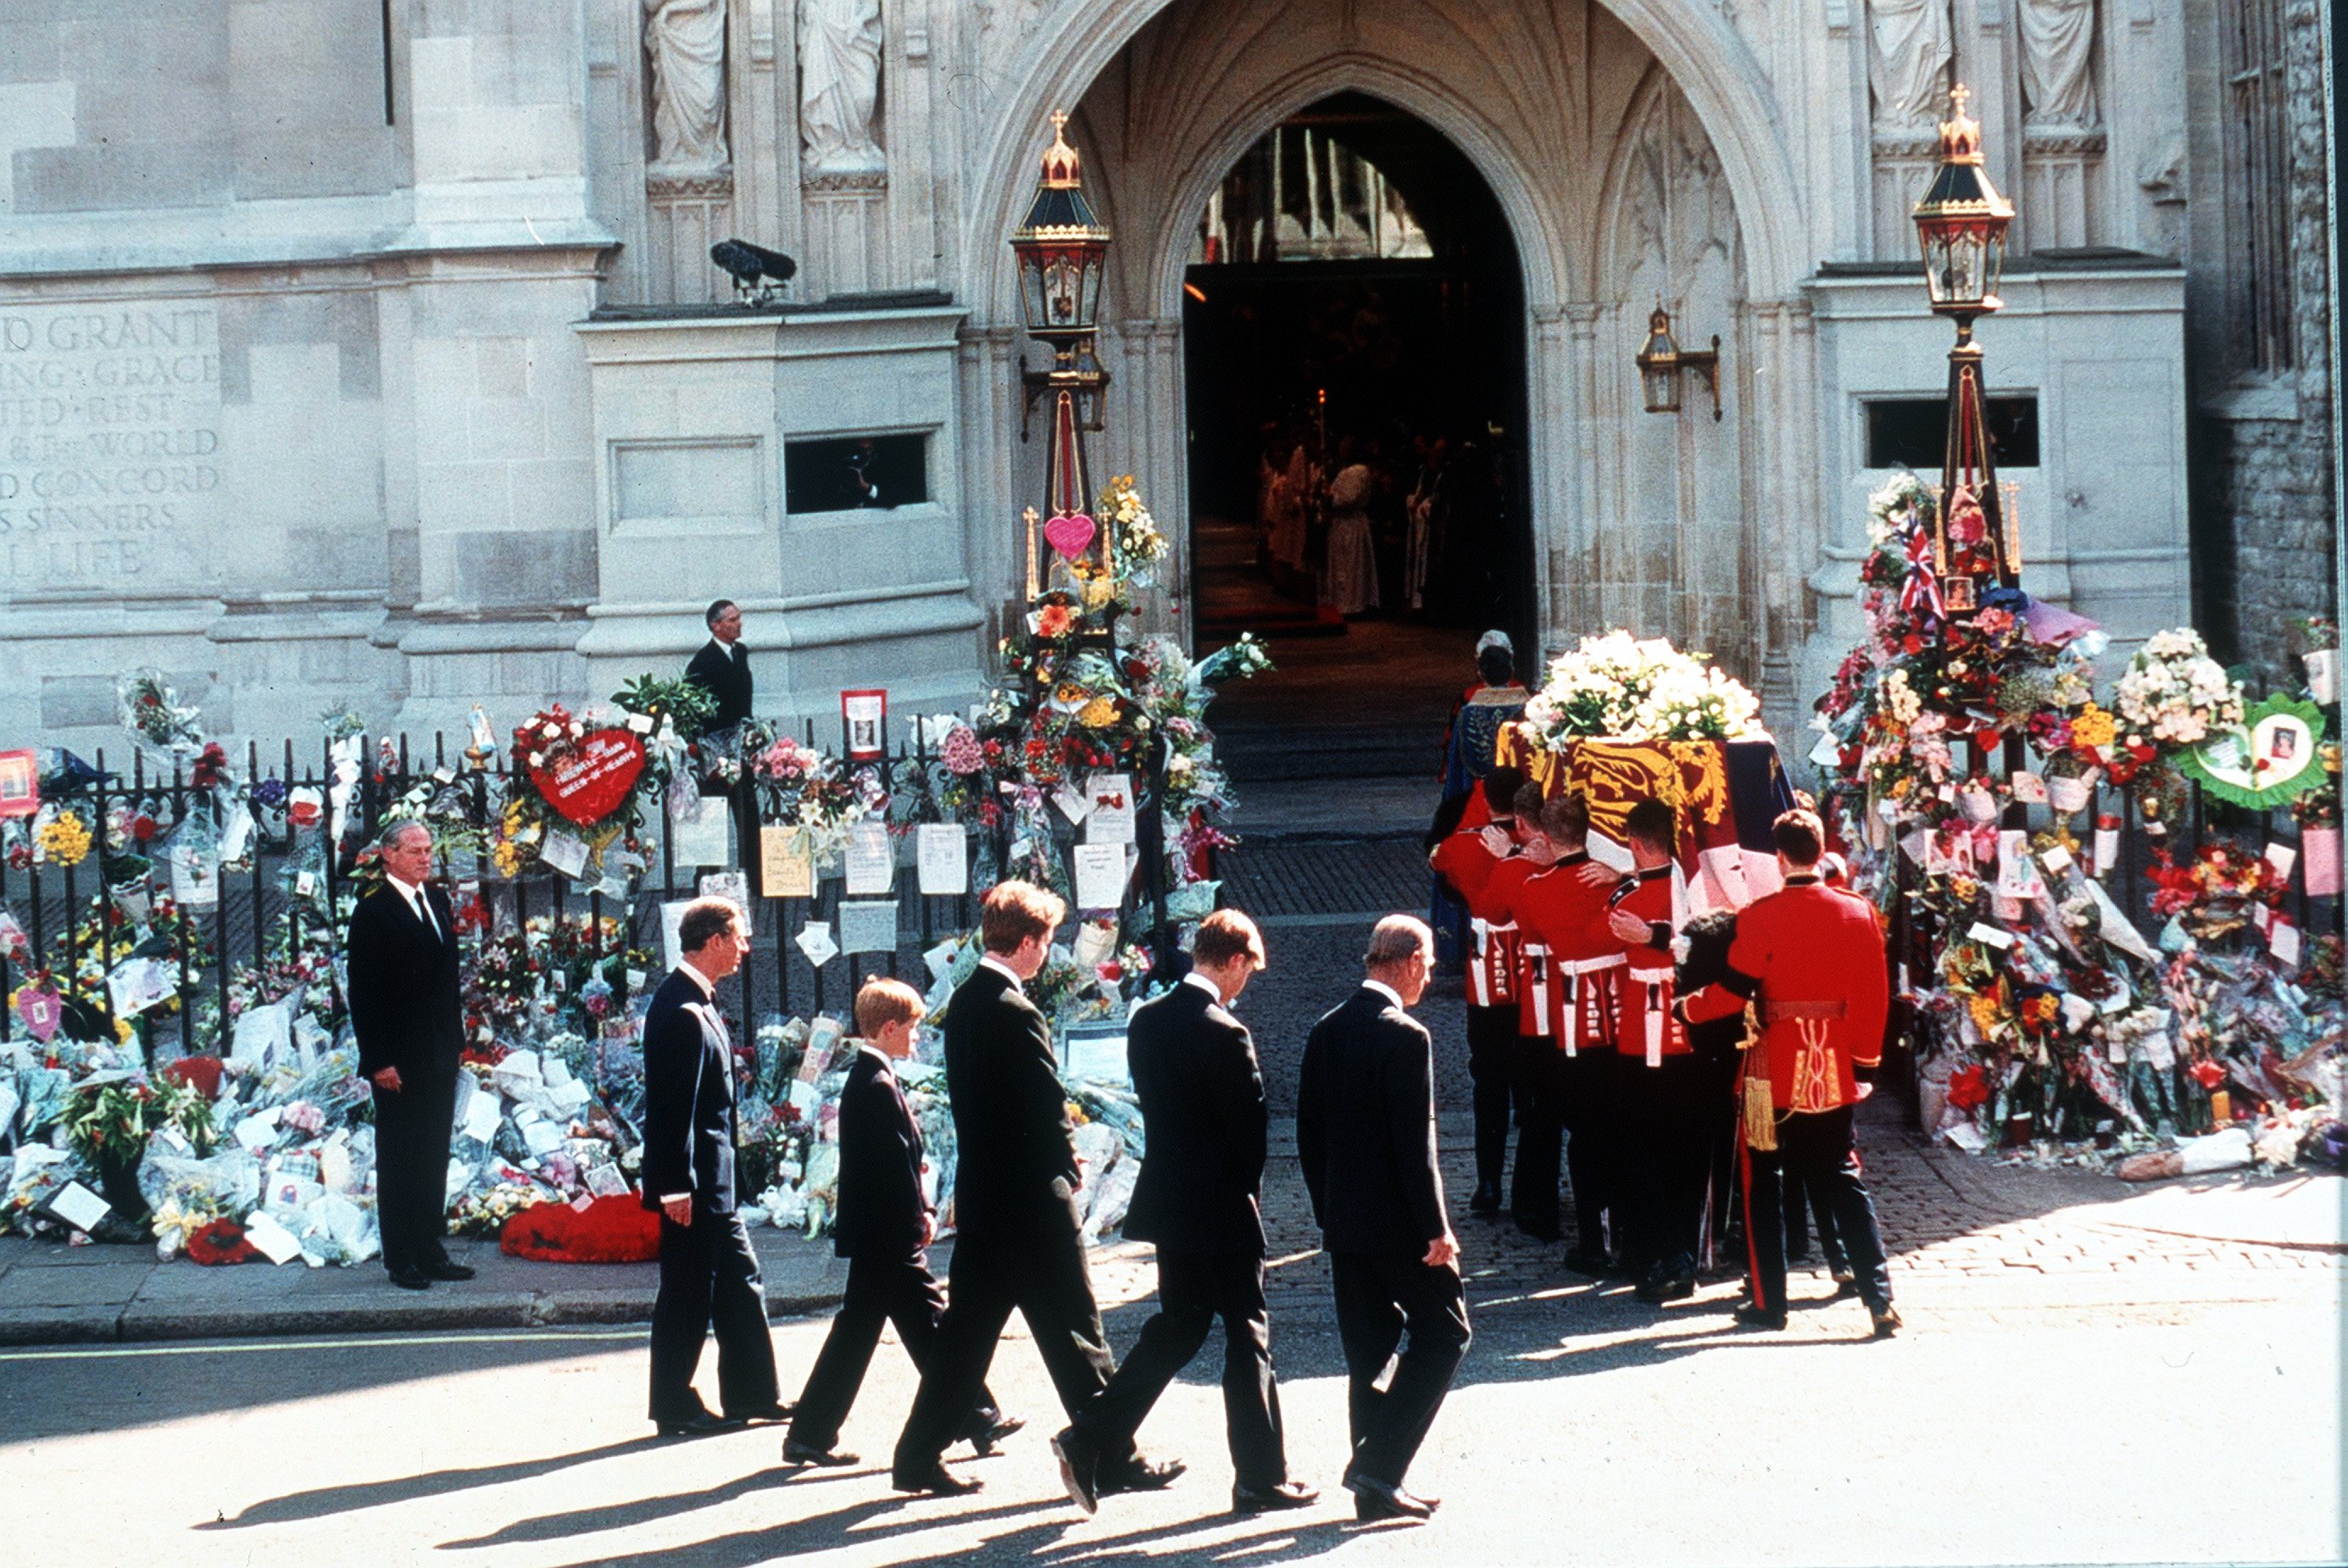 Earl Spencer, Prince William, Prince Harry, Prince Charles and the Duke of Edinburgh follow the coffin to the funeral cortege of Diana, Princess of Wales at Westminster Abbey on September 6, 1997 in London, England. / Source: Getty Images